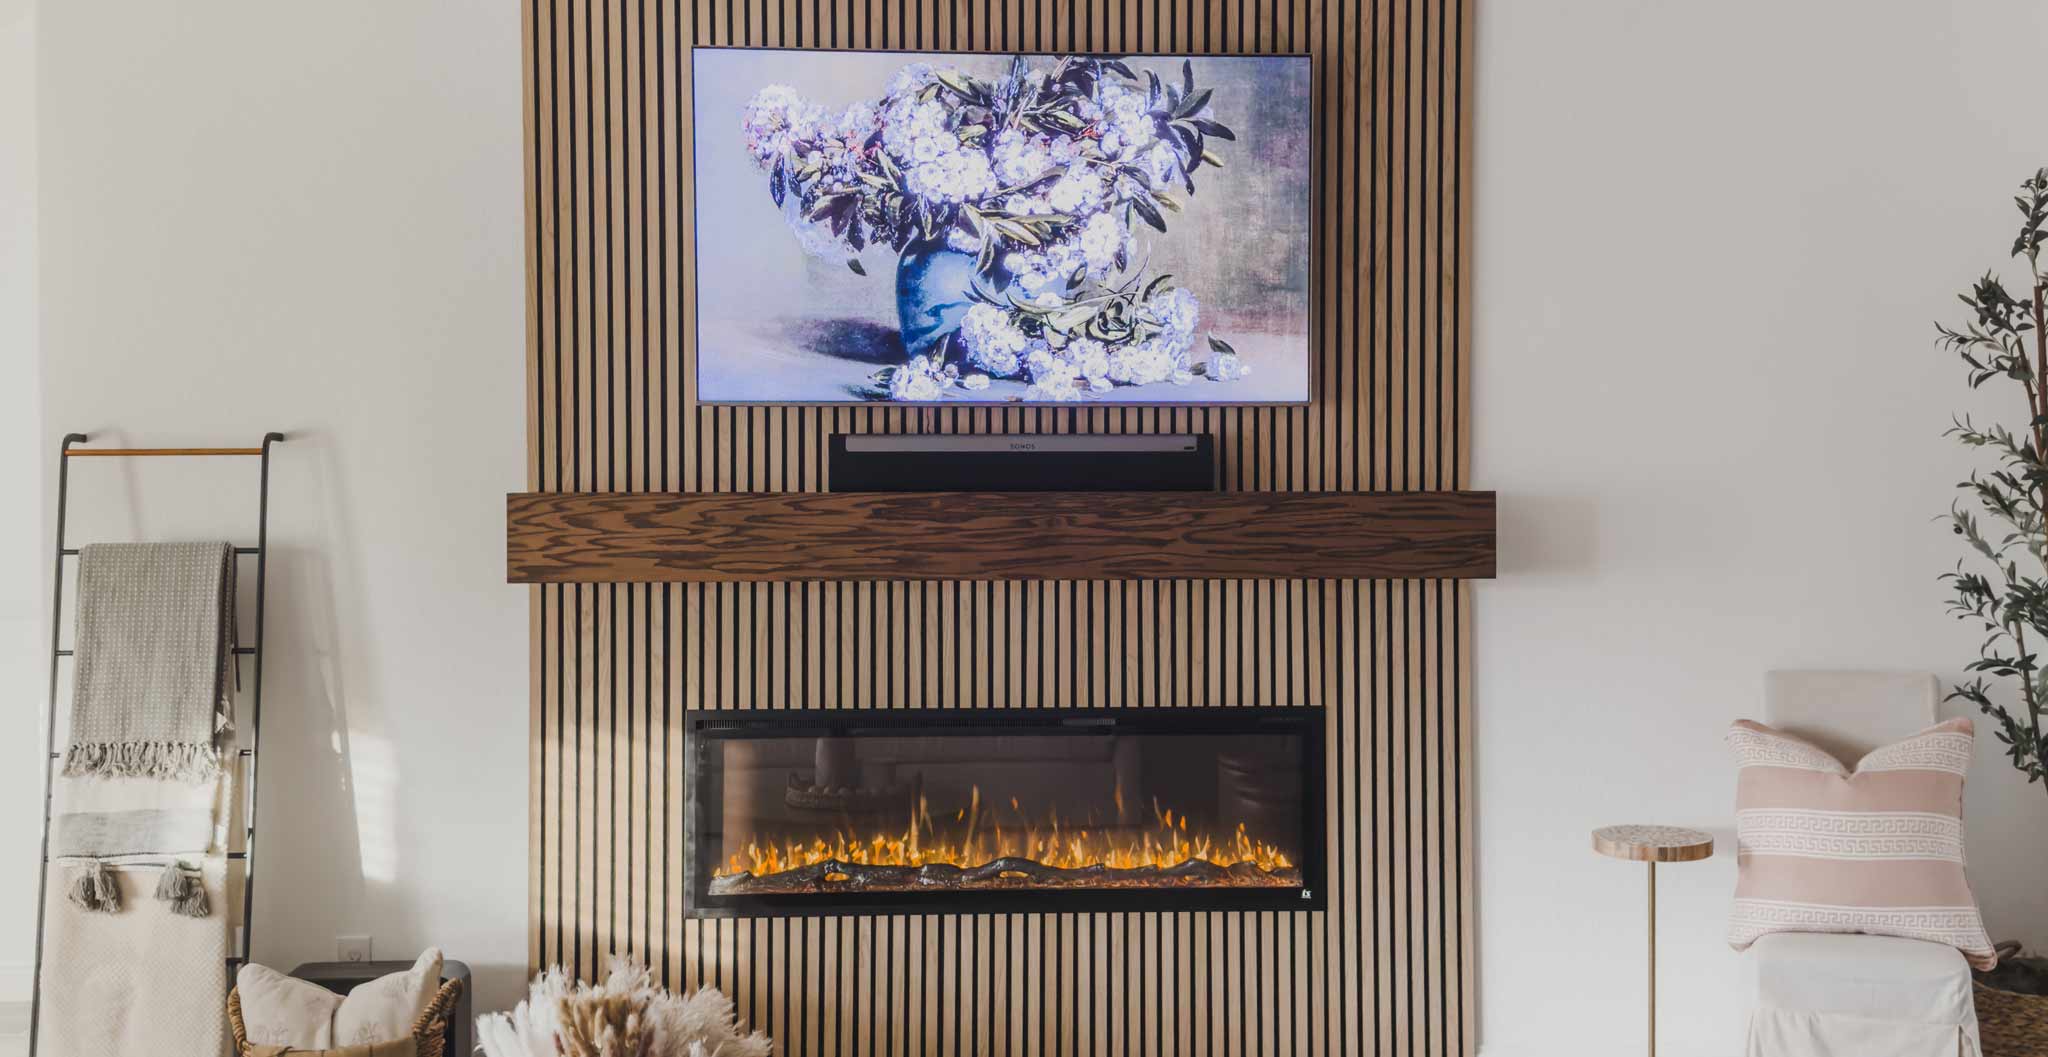 TV Over Fireplace How To: The Best Electric Fireplace Size For Your TV